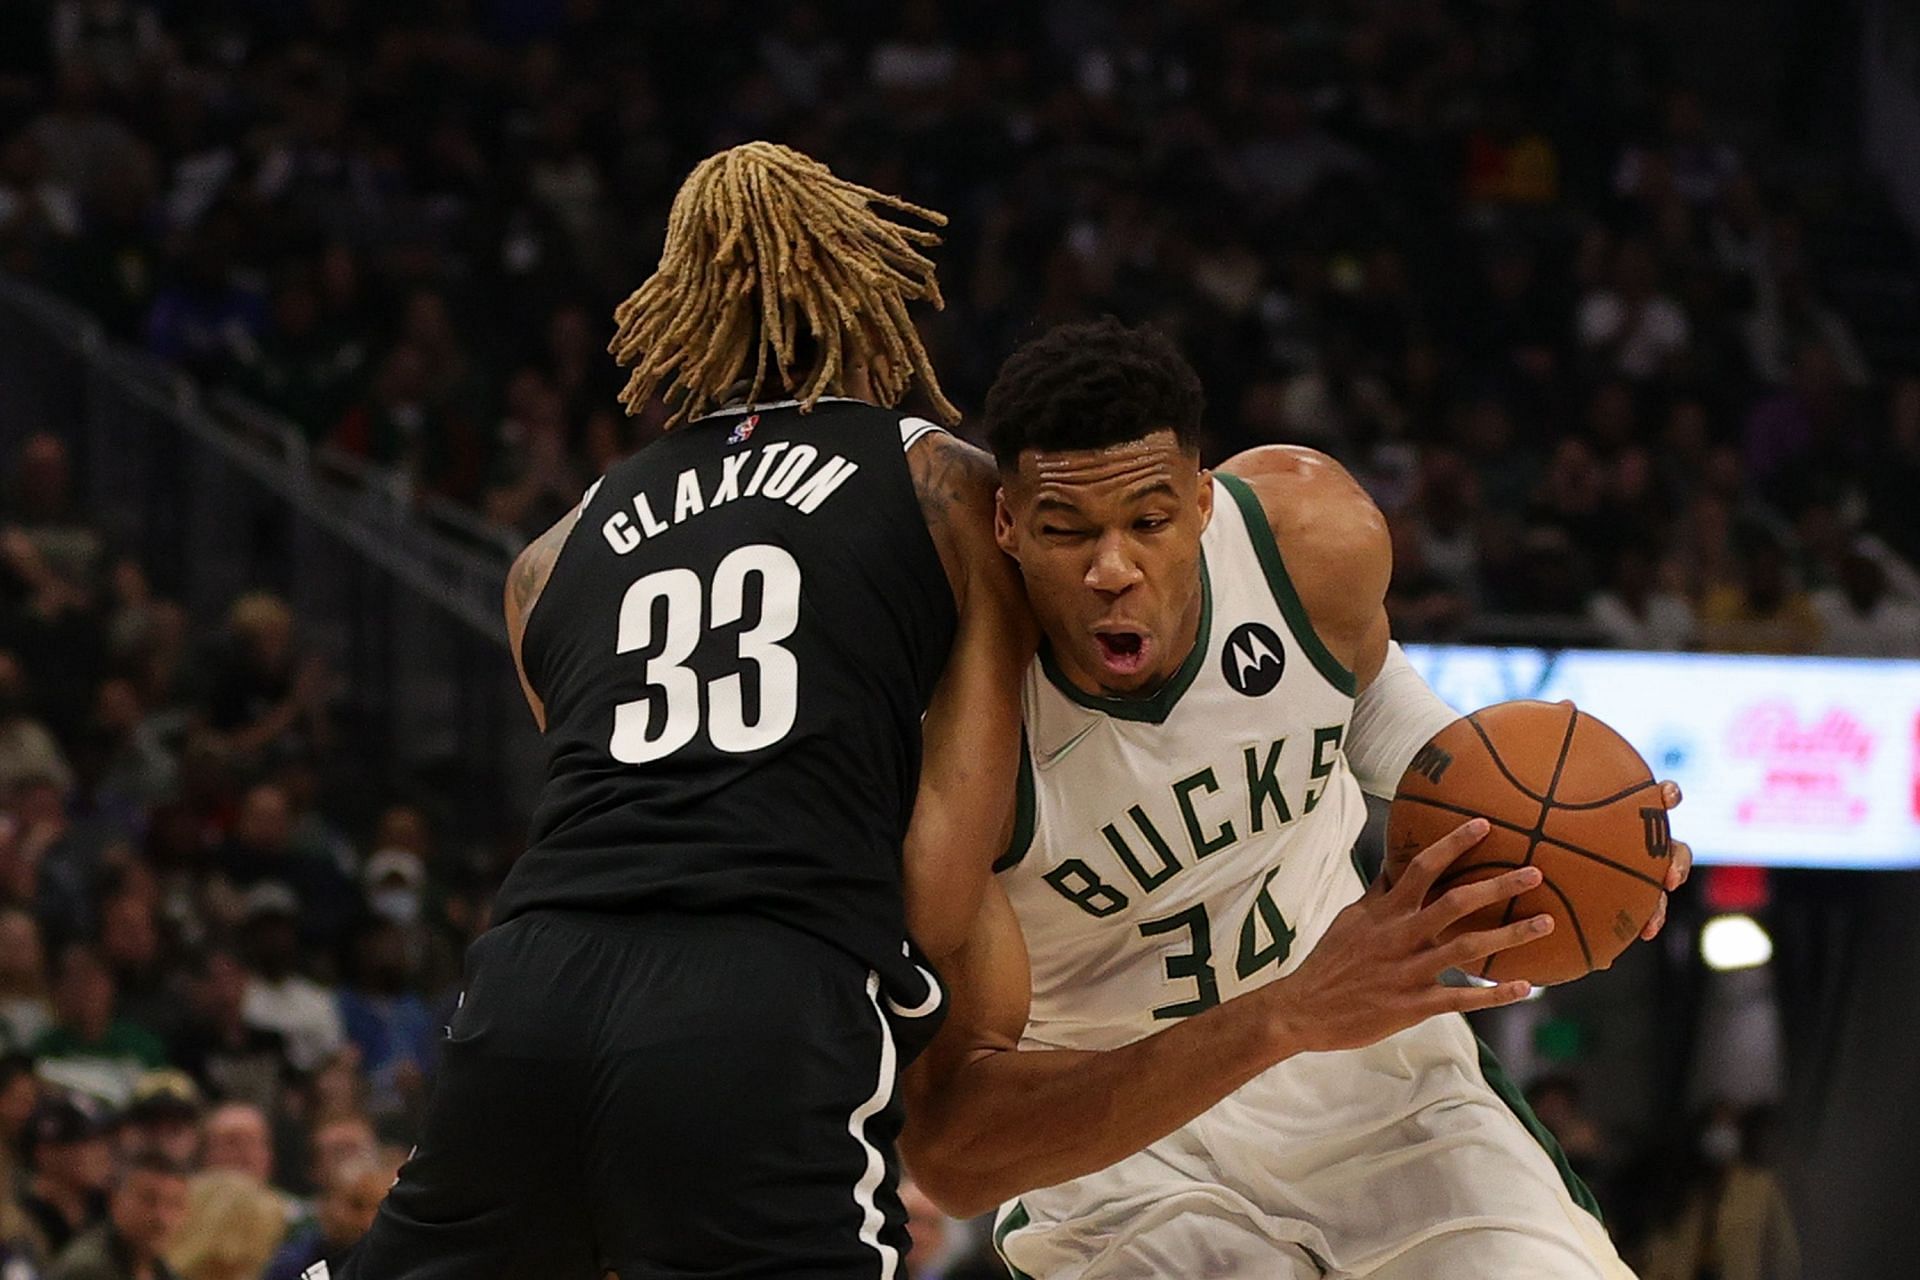 Giannis Antetokounmpo came up with a double-double as the Bucks bested the Nets on opening night